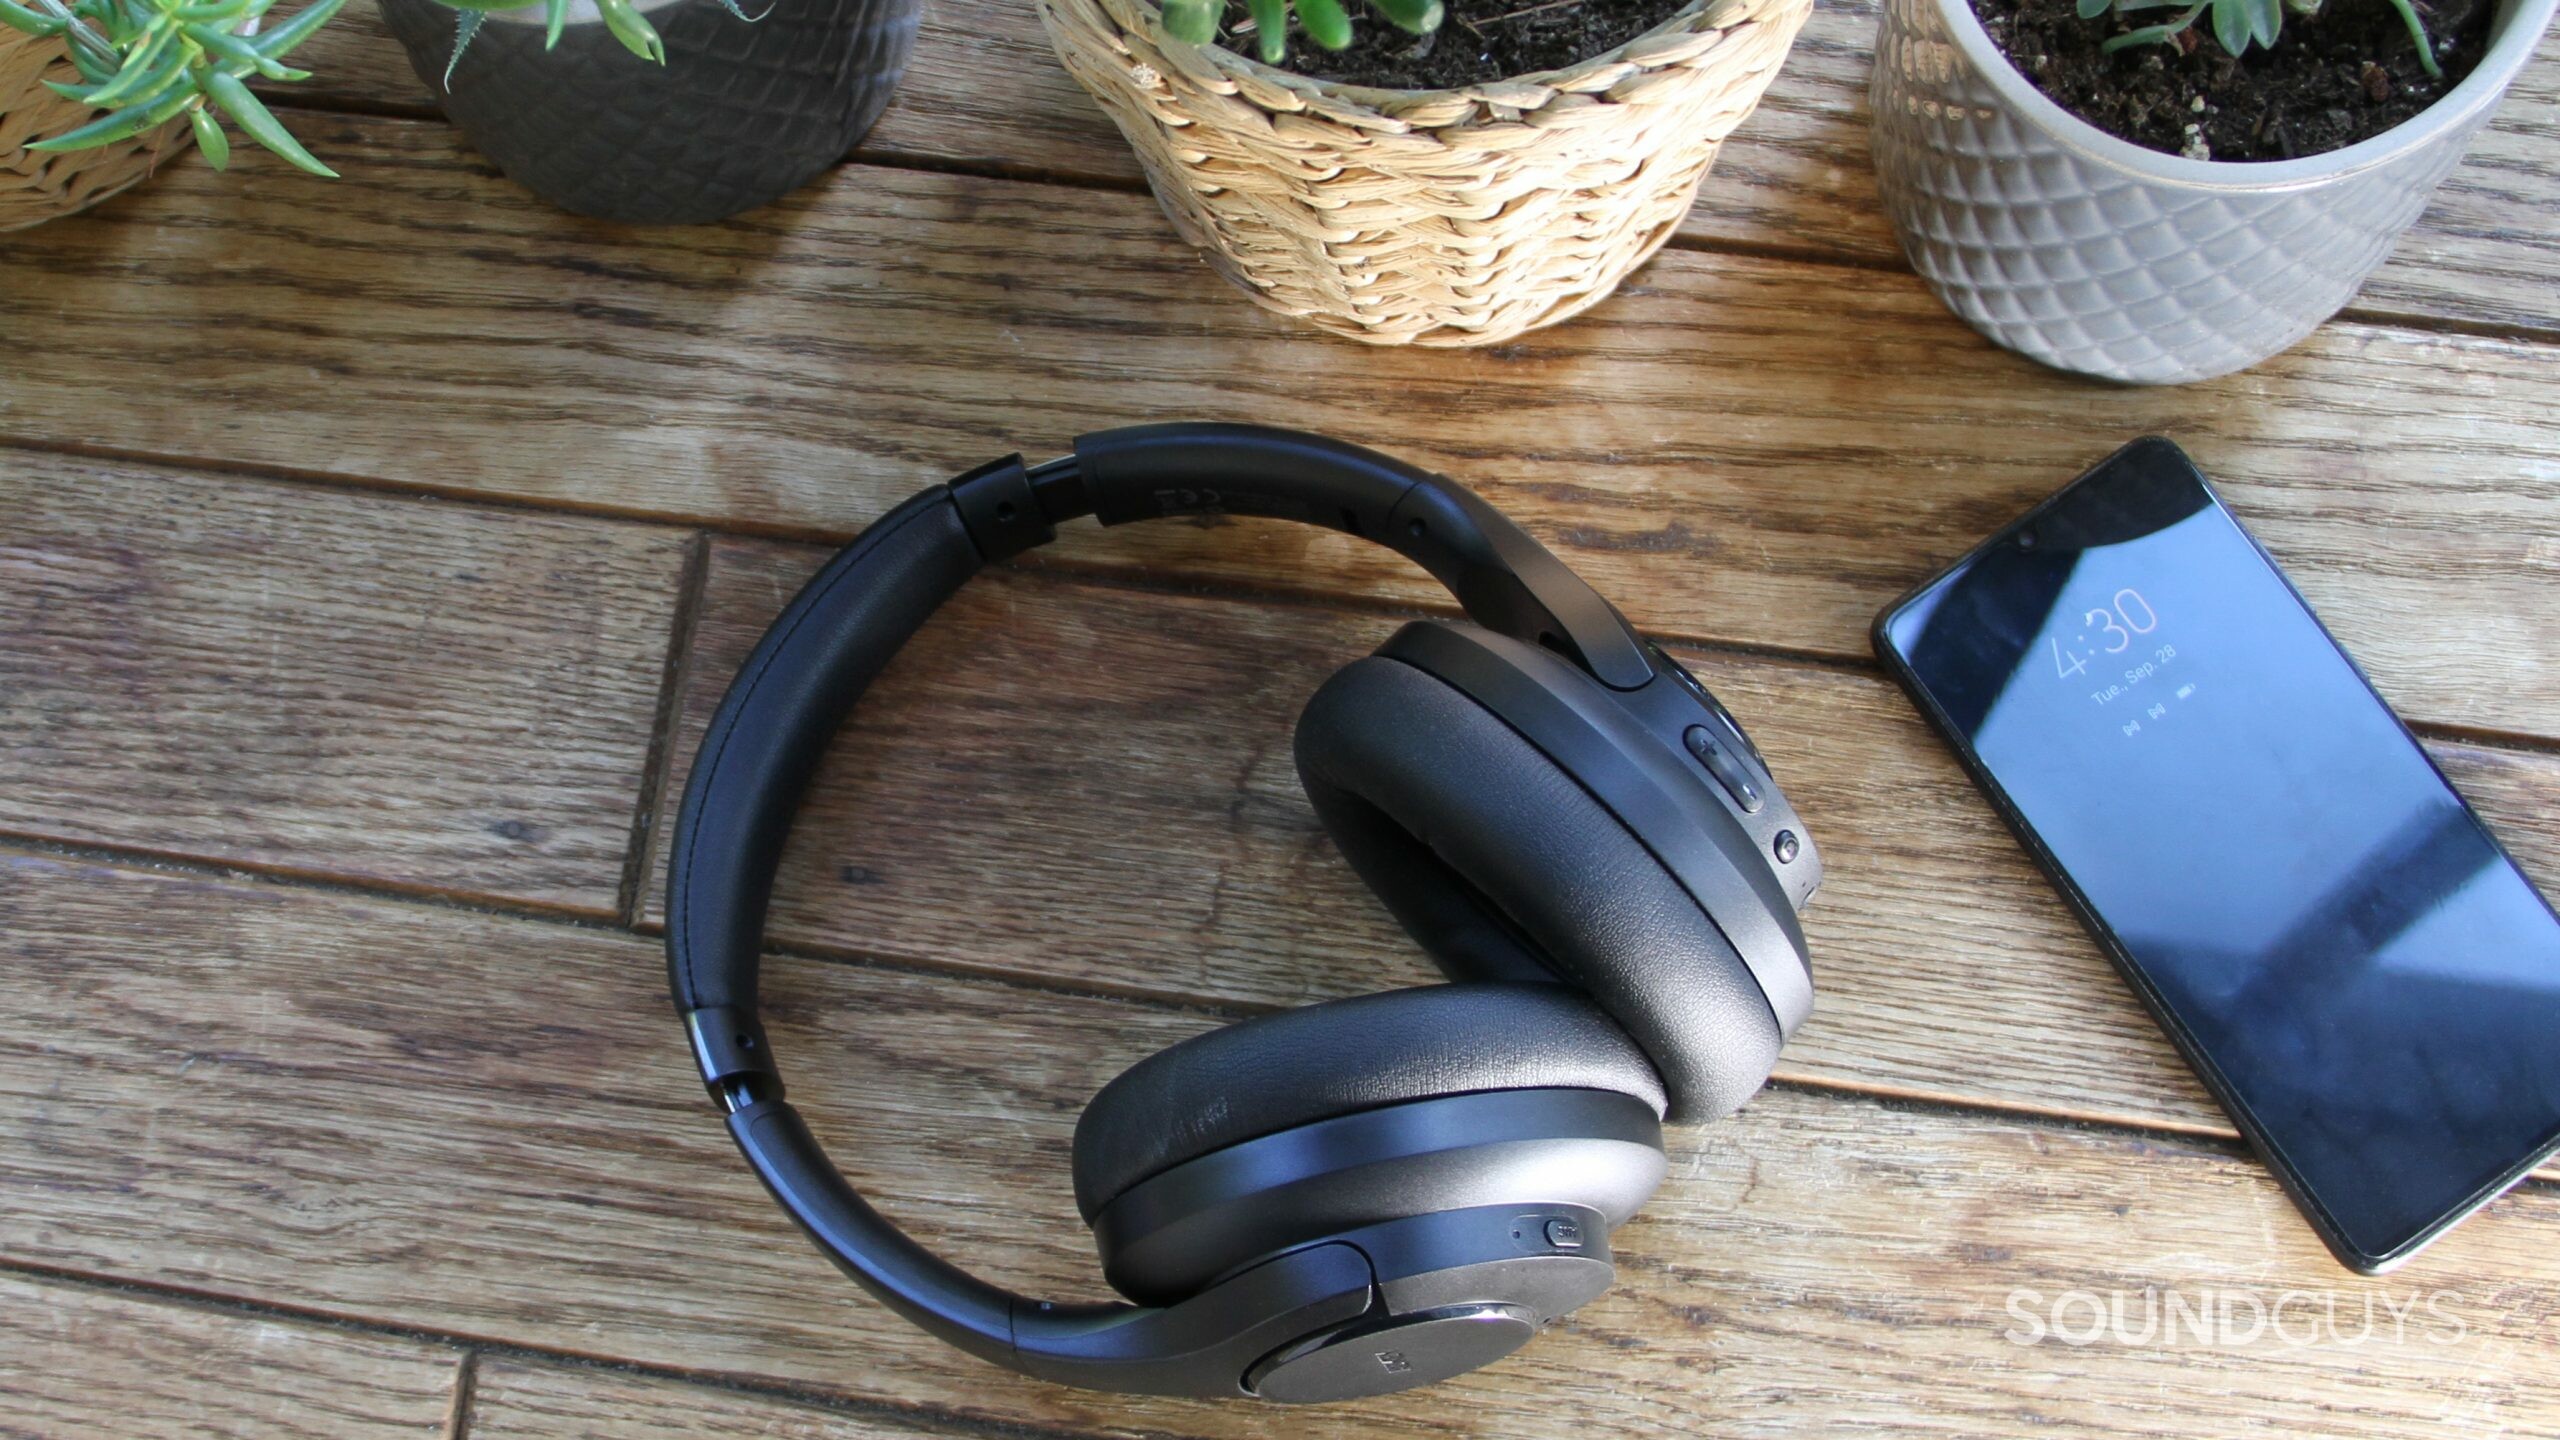 Aukey Hybrid Active Noise Canceling Headphones seen from above on a wood surface with a smartphone and potted plants